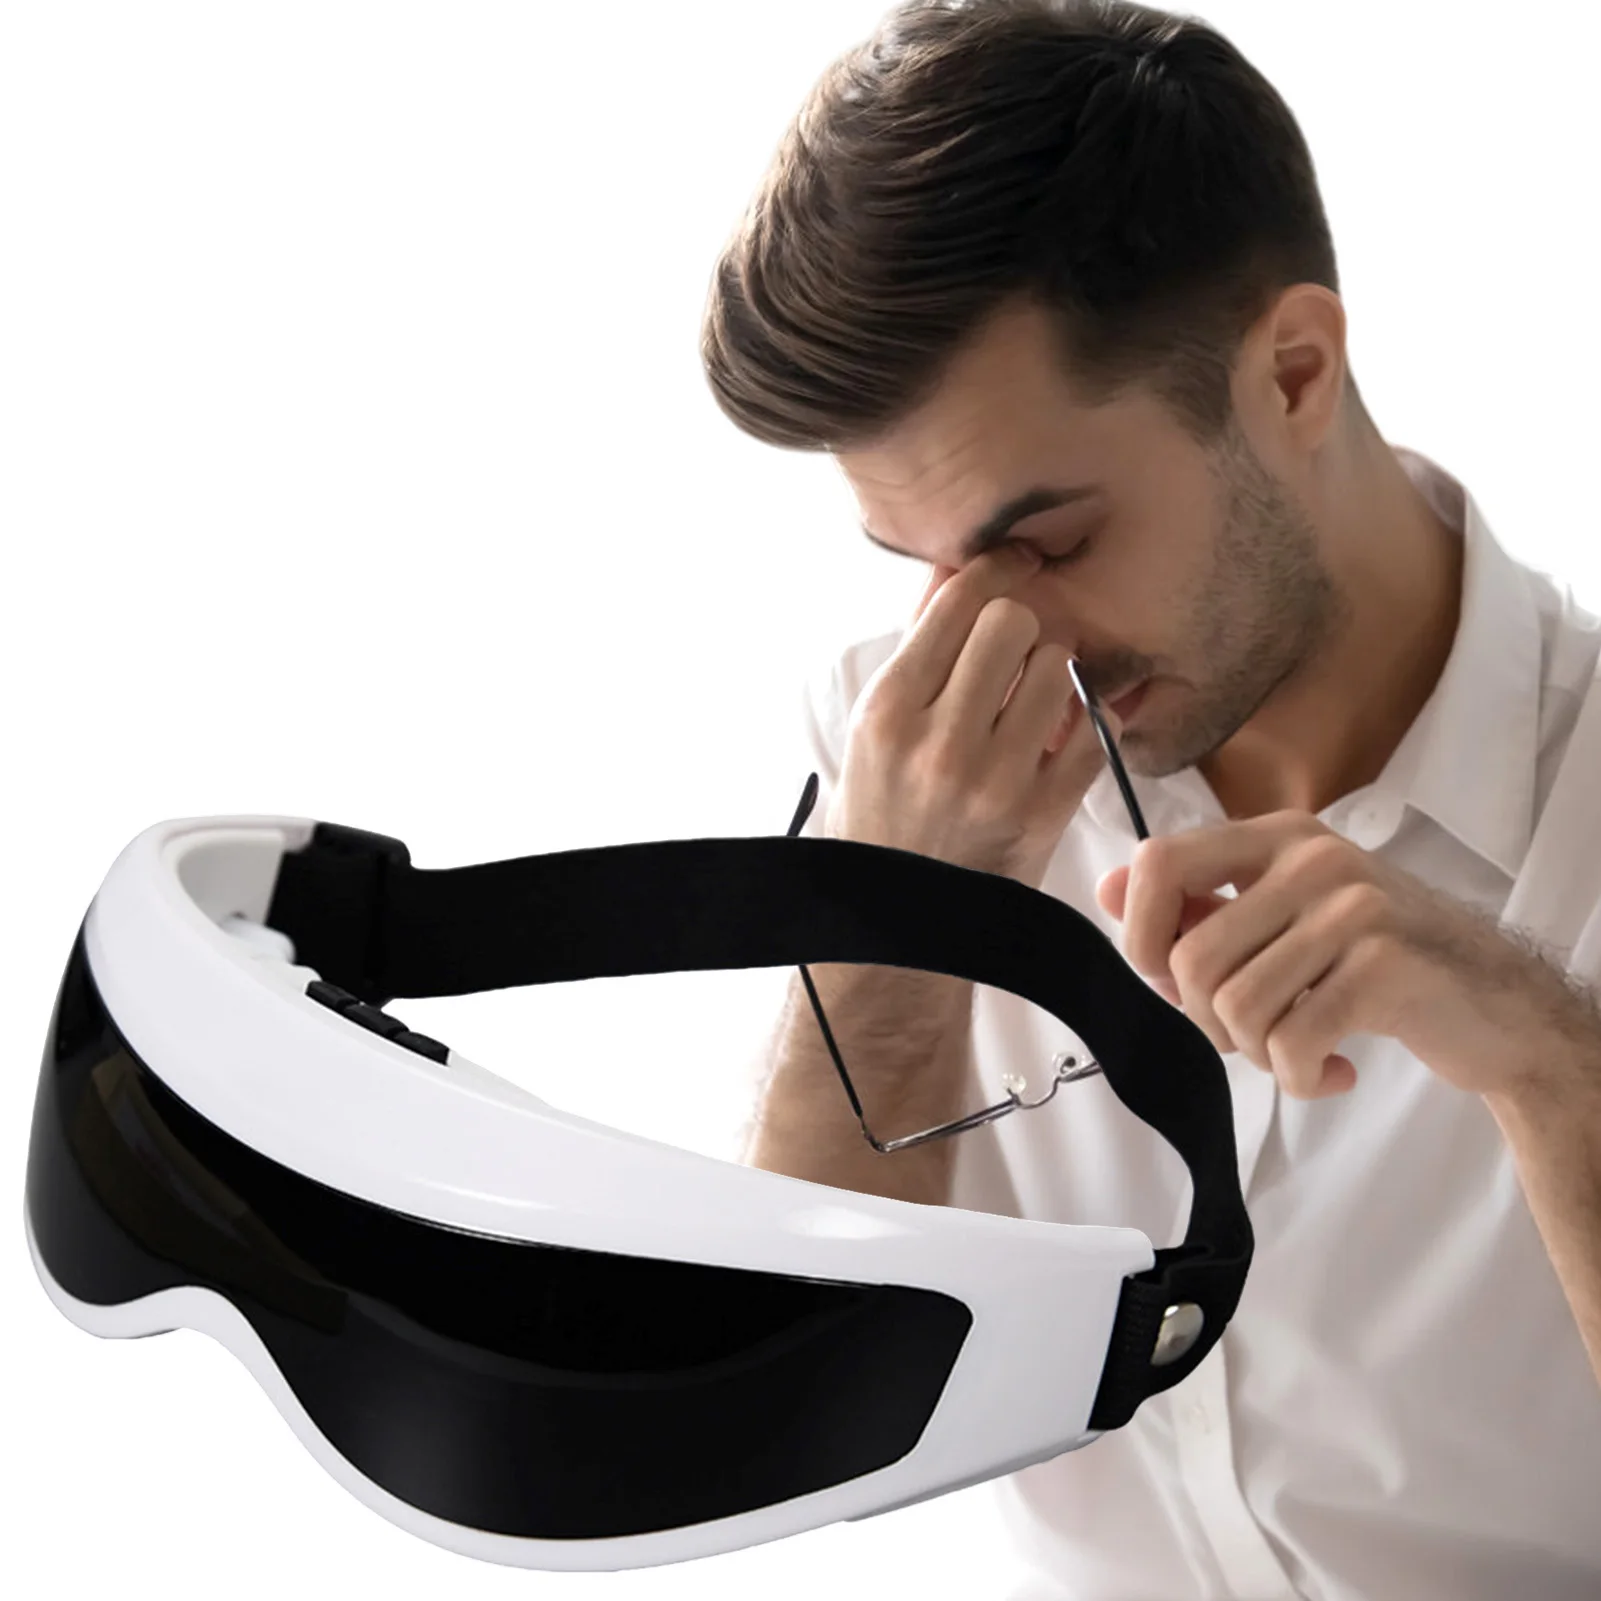 

Electric Vibration Eye Massager Smart Vibration Eye Care Compress Massager for Relax Migraines Relief Improve Sleep